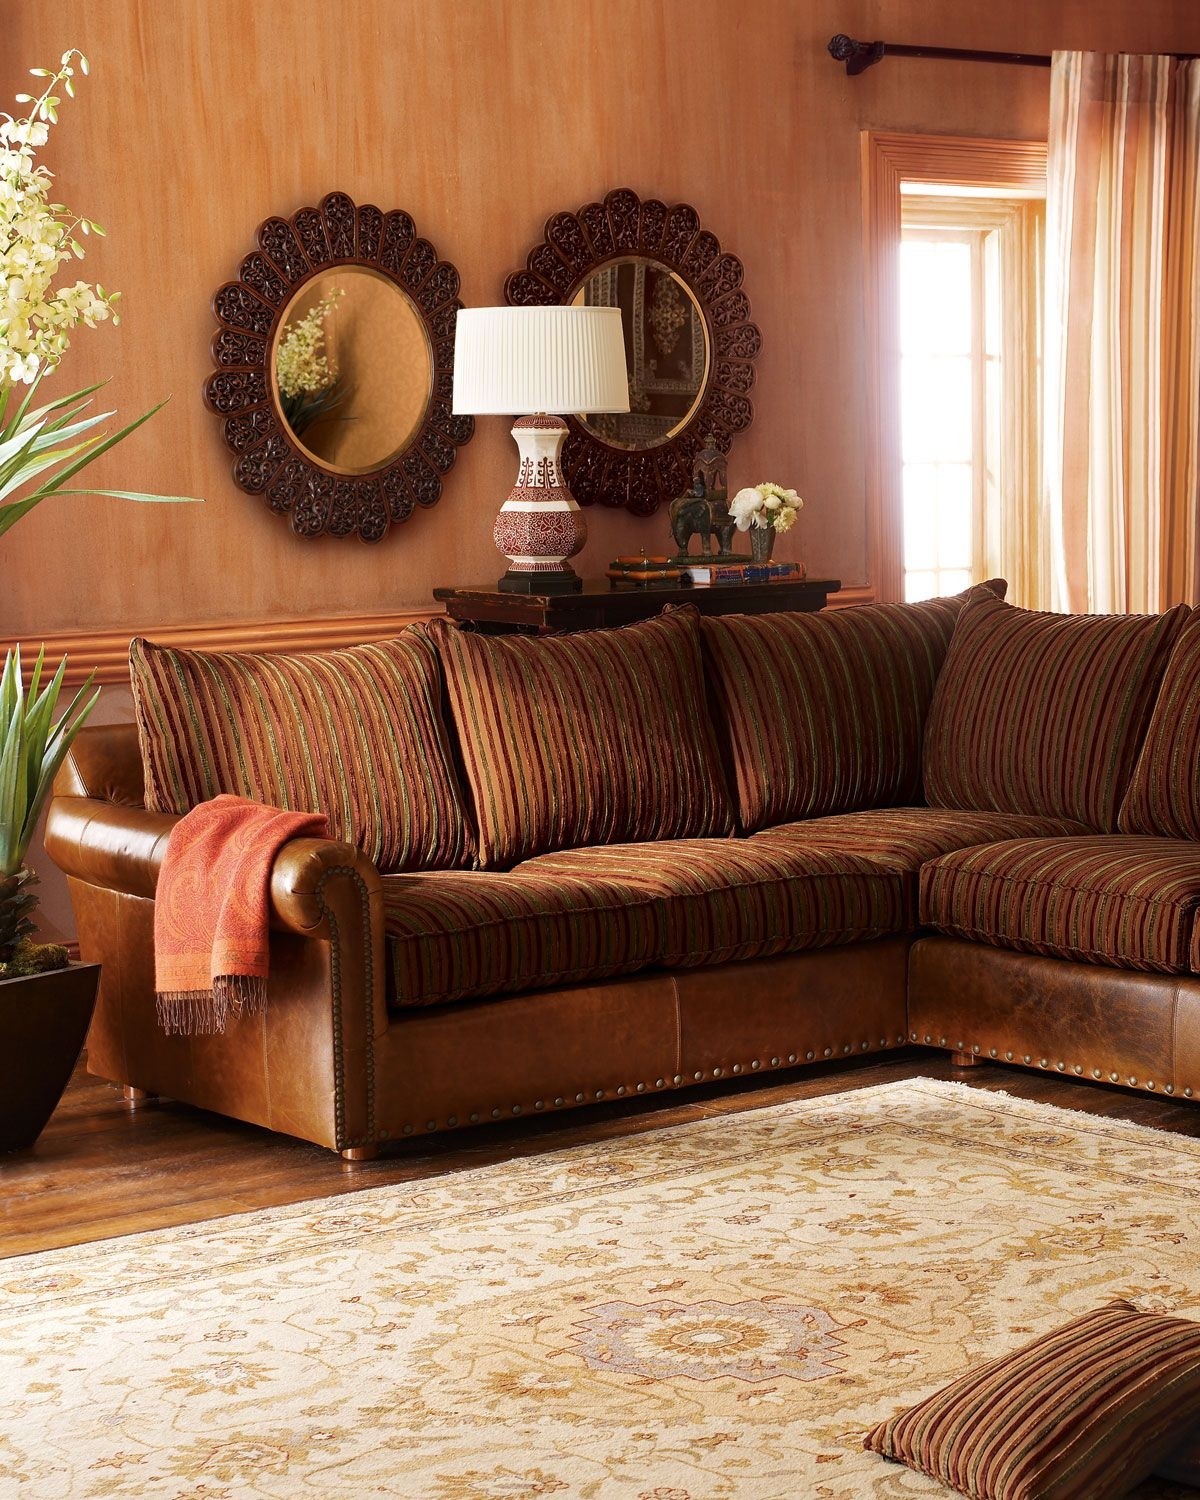 Striped sectional sofa by old hickory tannery at horchow shown